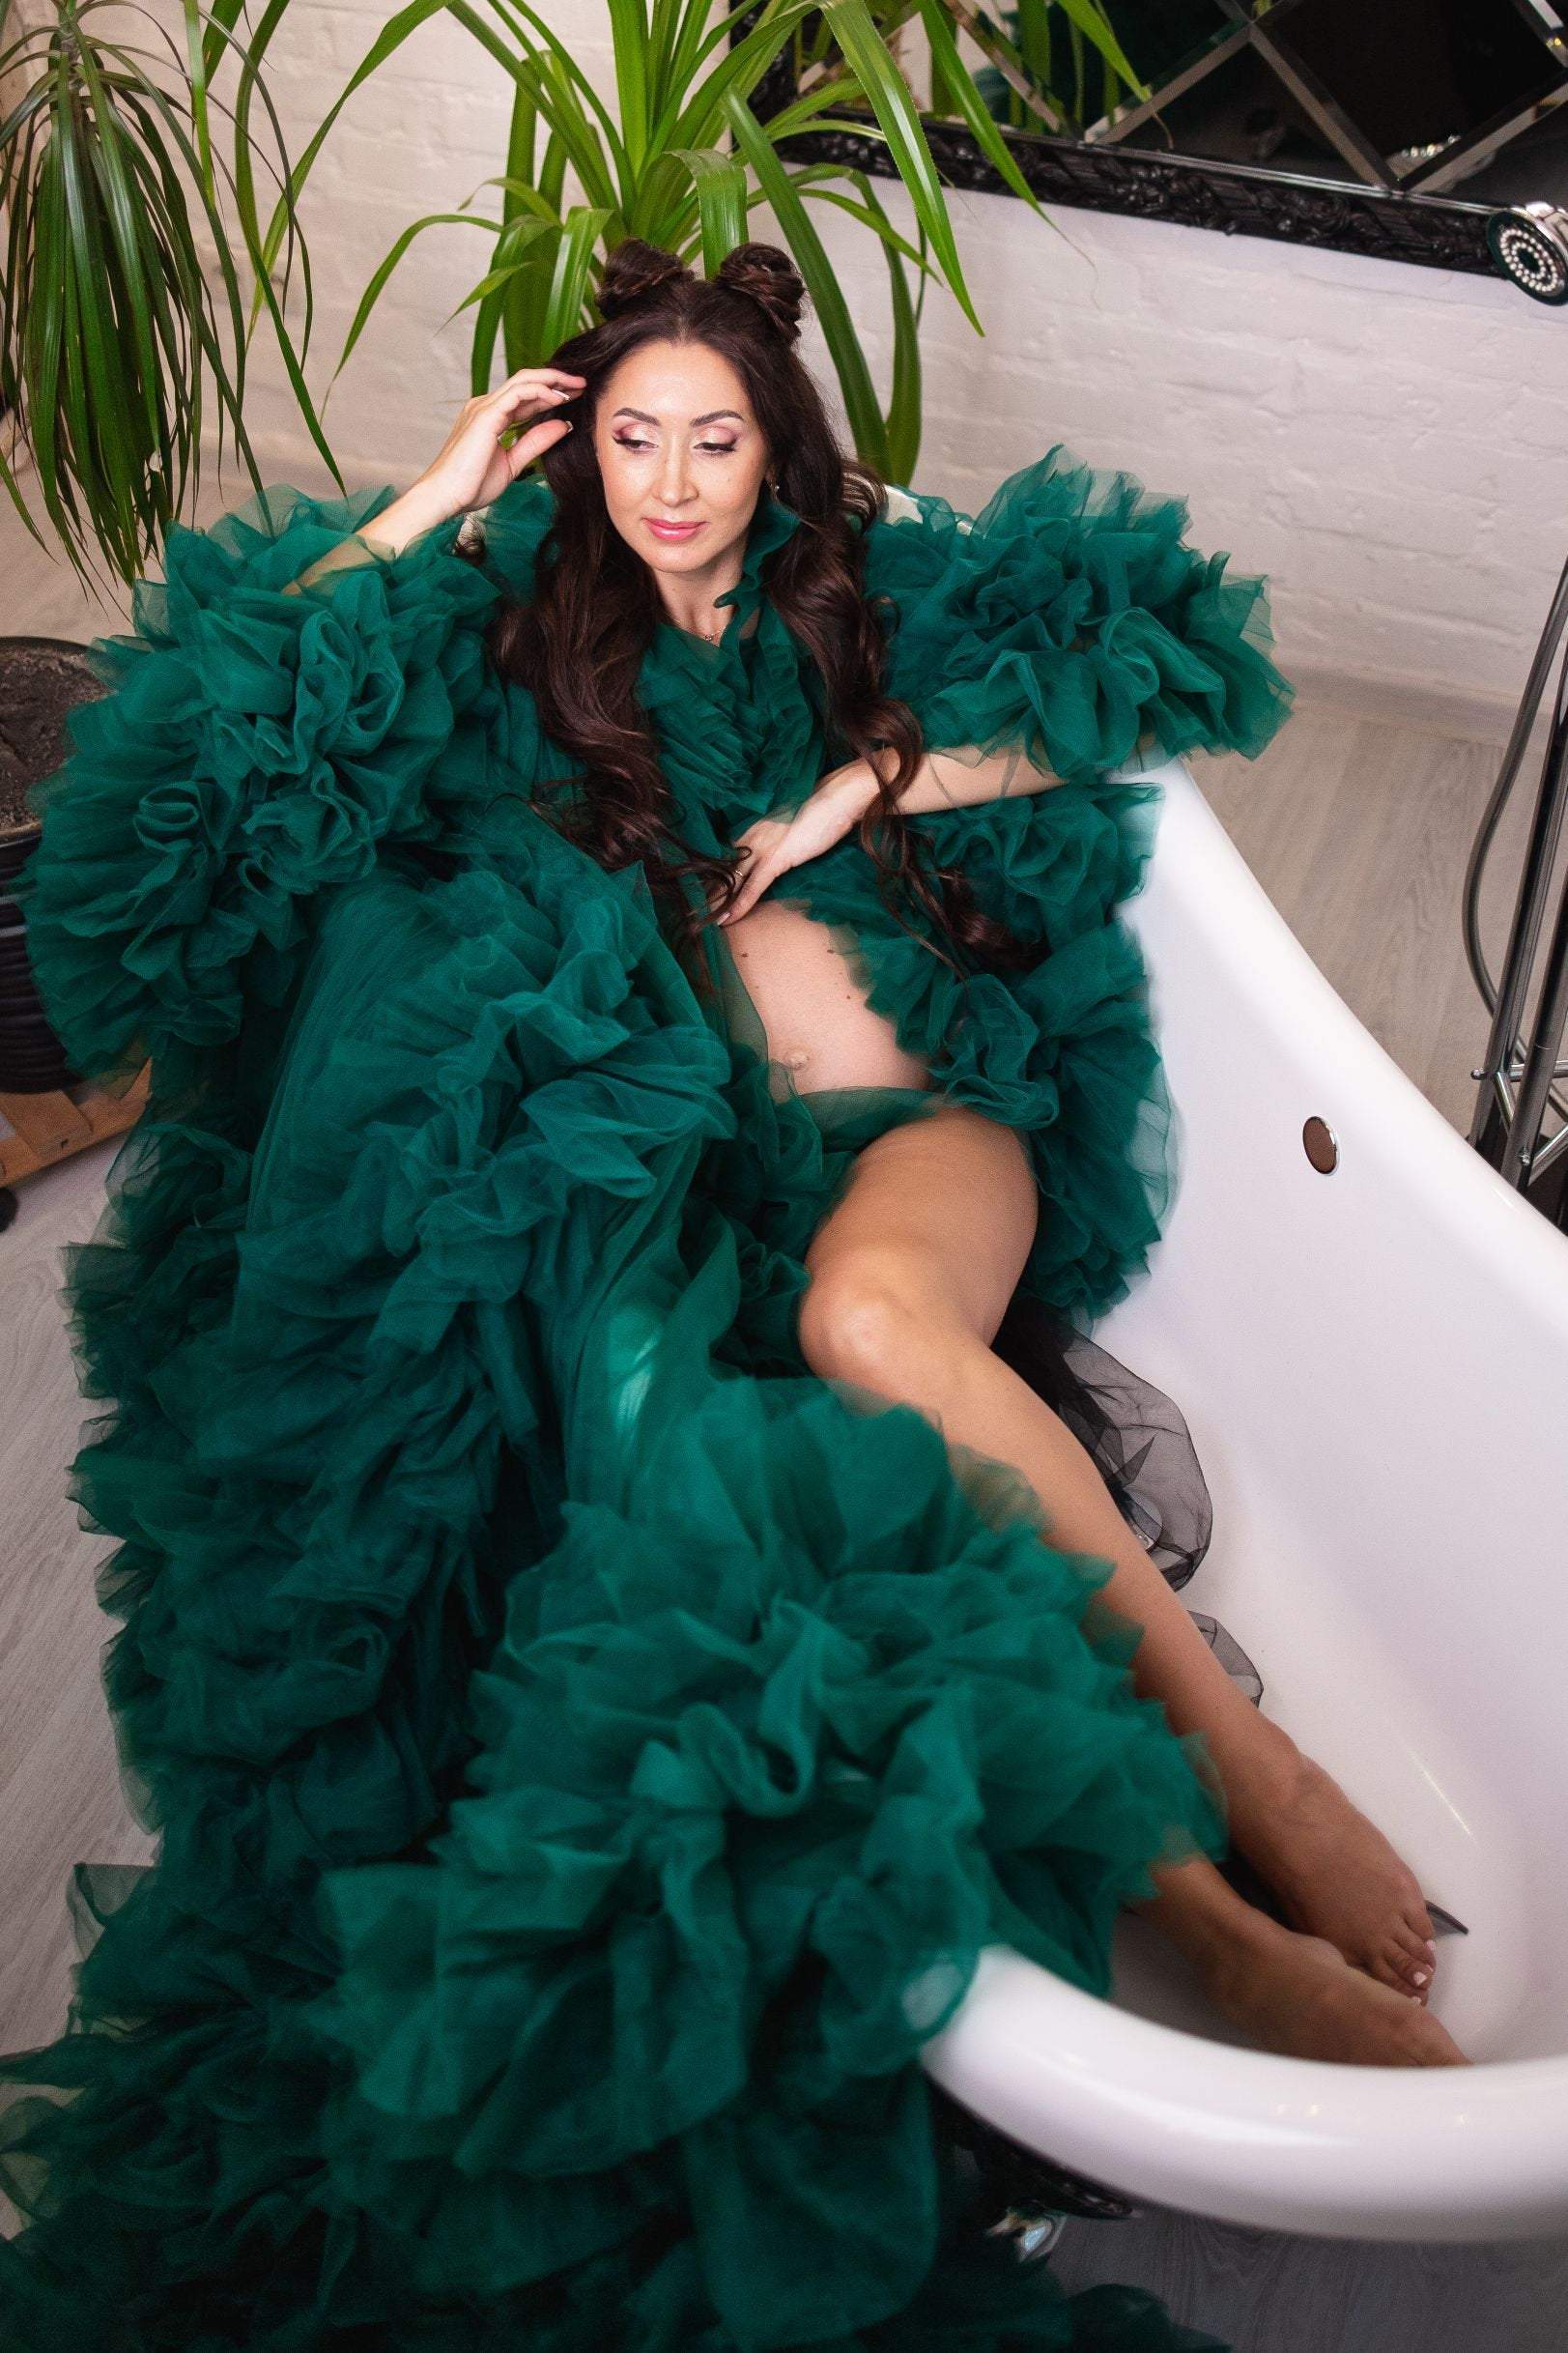 Matchinglook Gold Feather Cape, Maternity Photoshoot Robe, Feather Robe, Boudoir Robe, Pregnancy Robe, Erotic Robe, Maternity Boudoir Dress, Luxury Robe Green